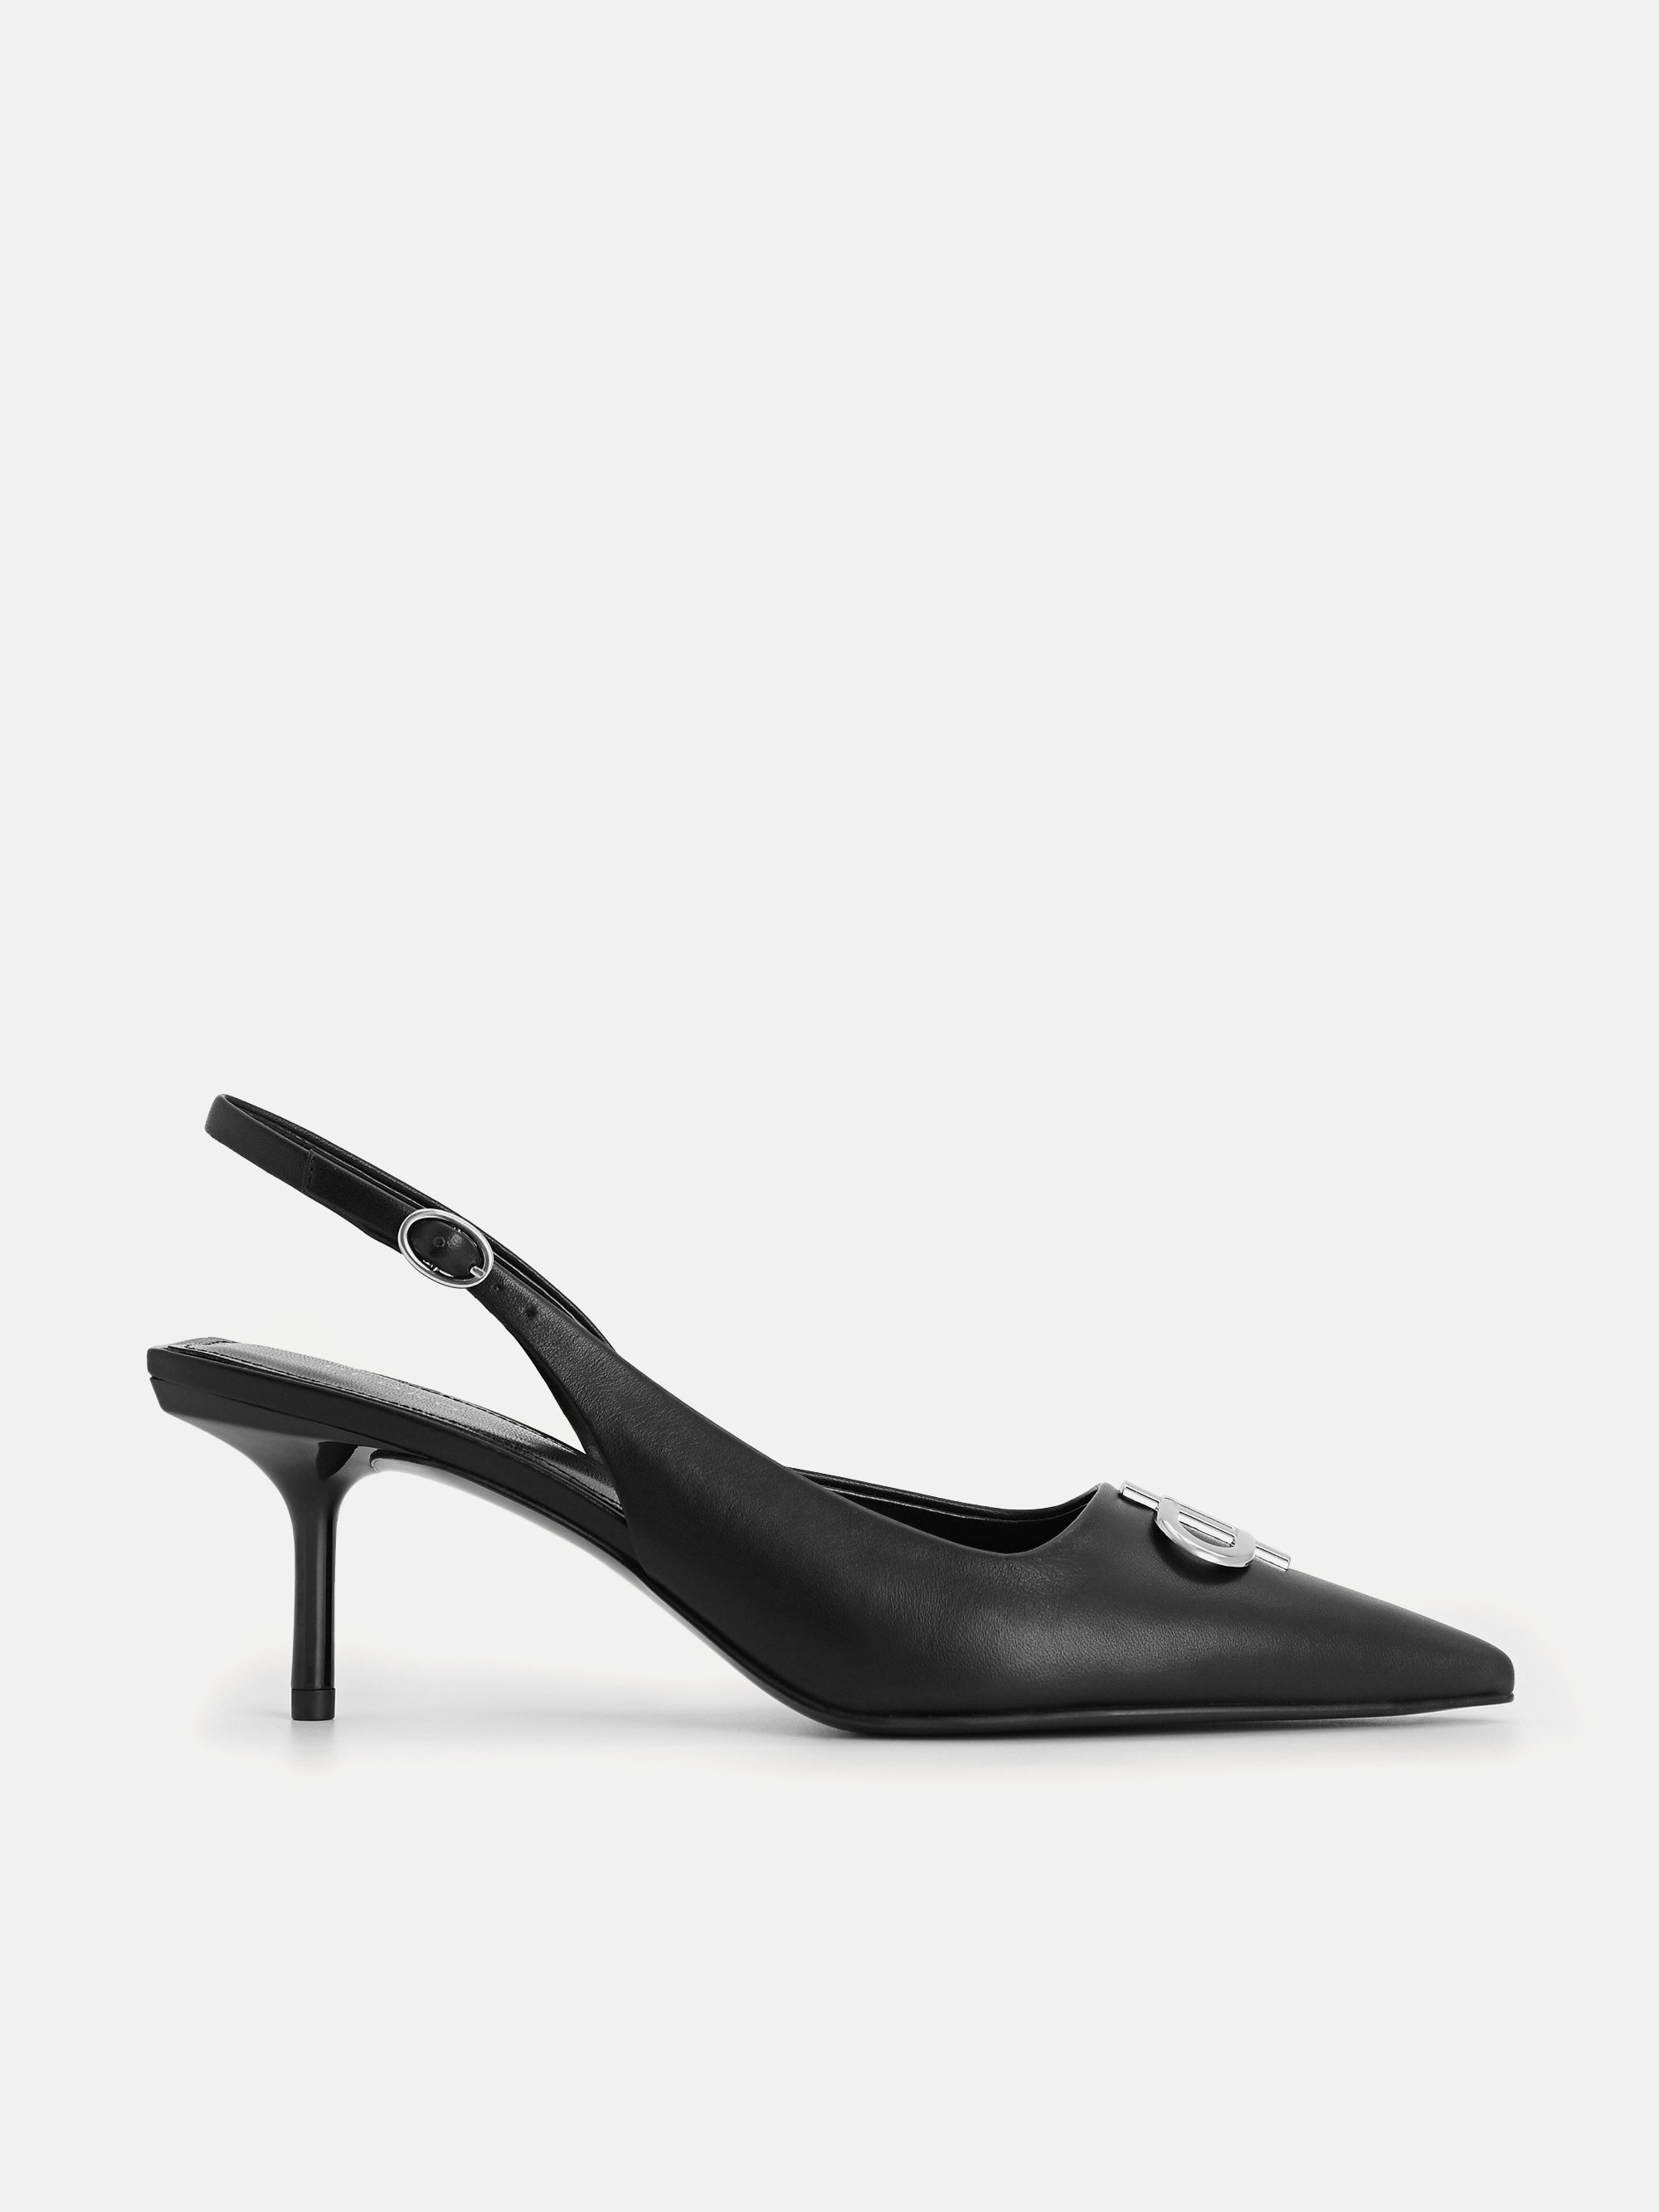 Icon Leather Pointed Slingback Pumps - PEDRO SG